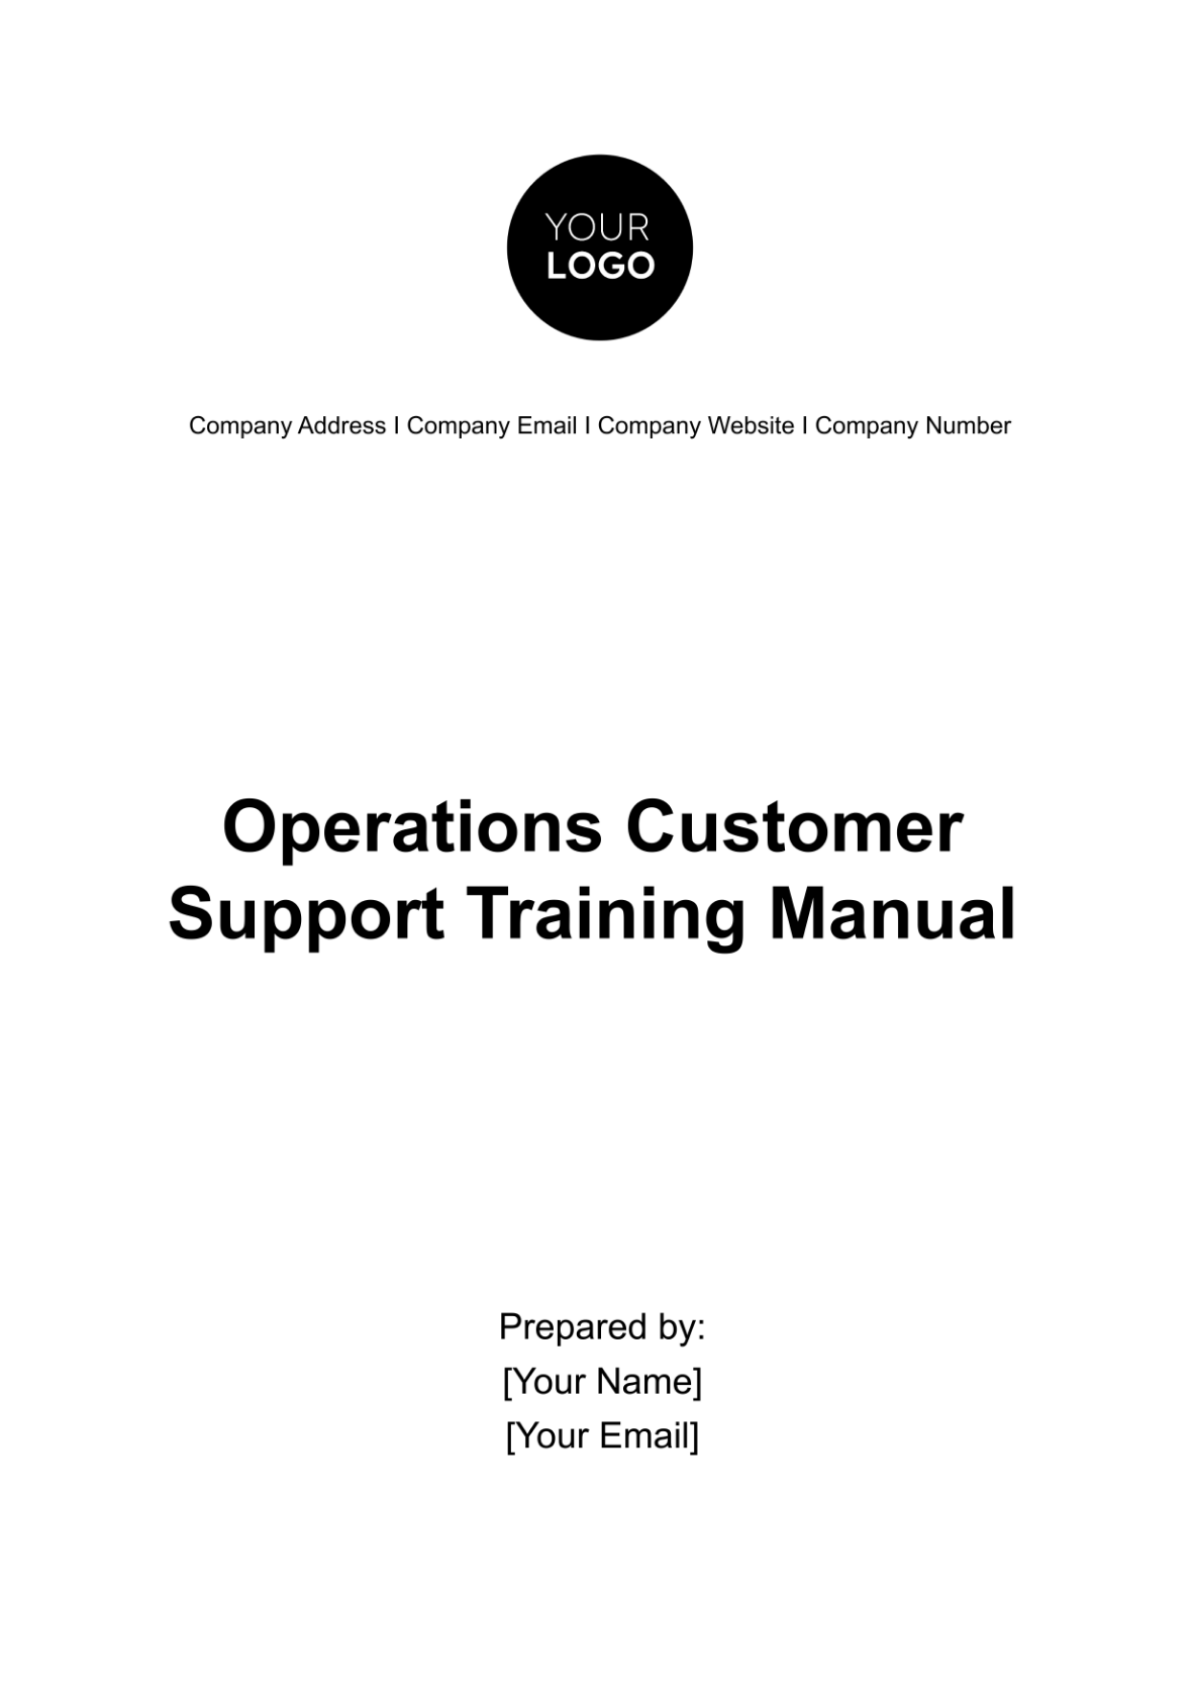 Operations Customer Support Training Manual Template